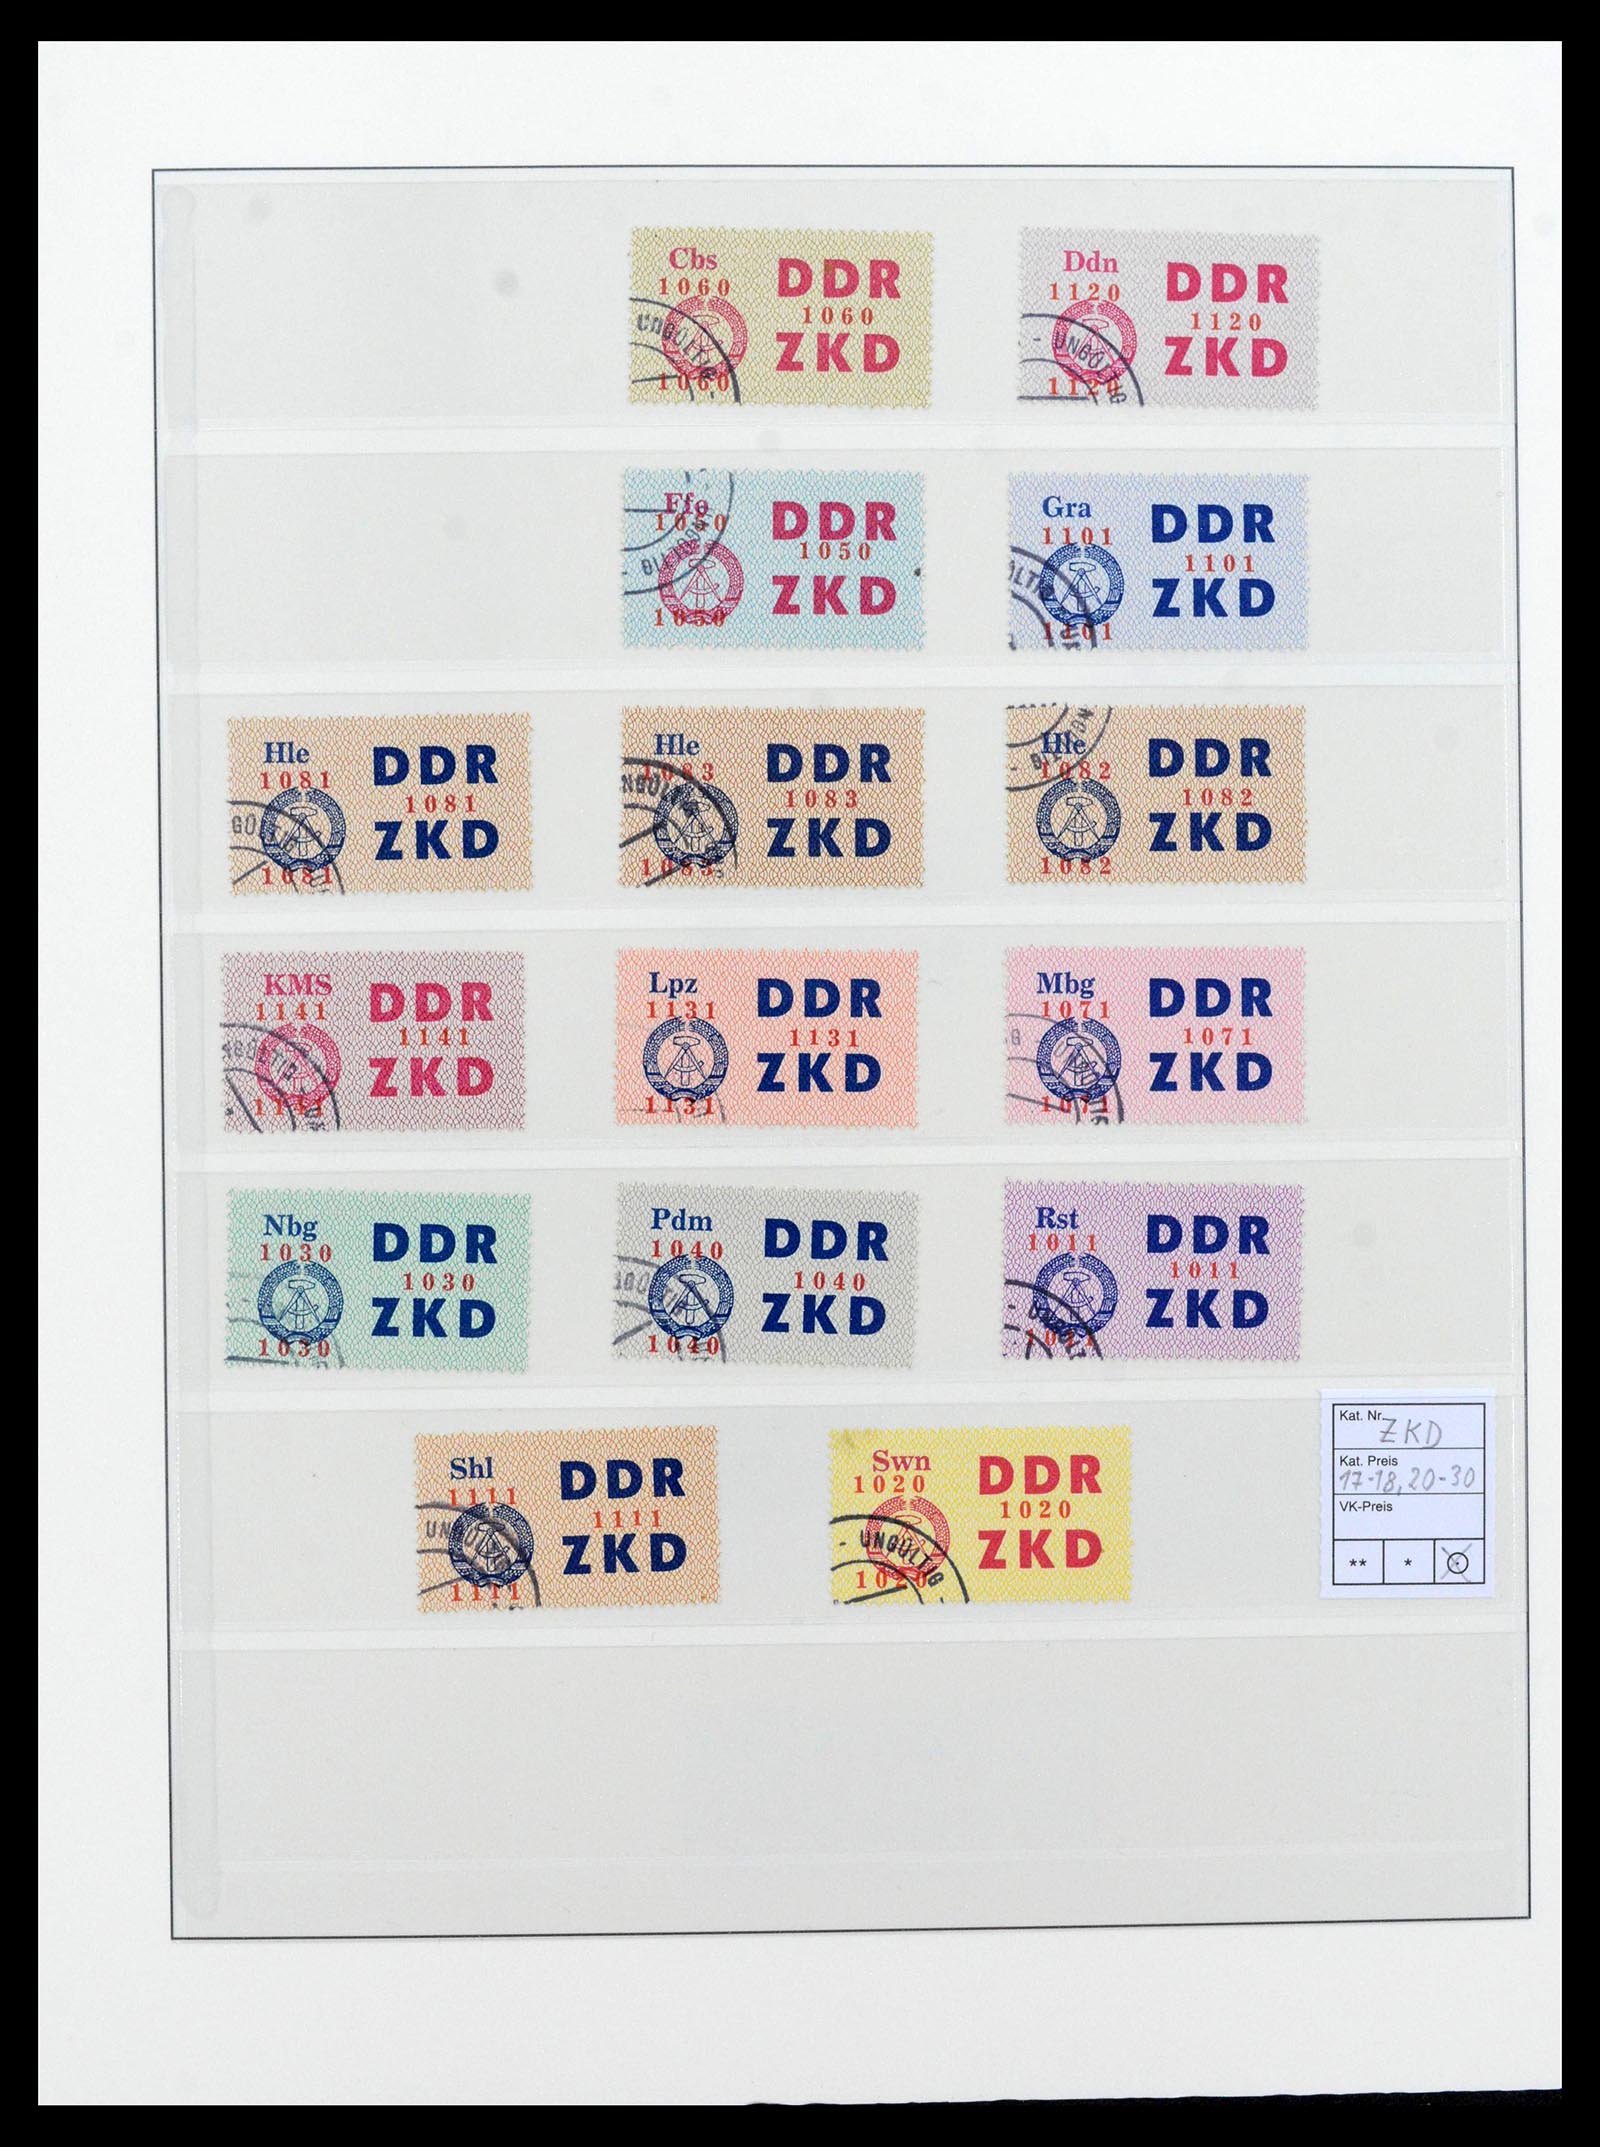 39376 0033 - Stamp collection 39376 GDR service stamps 1951-1965.